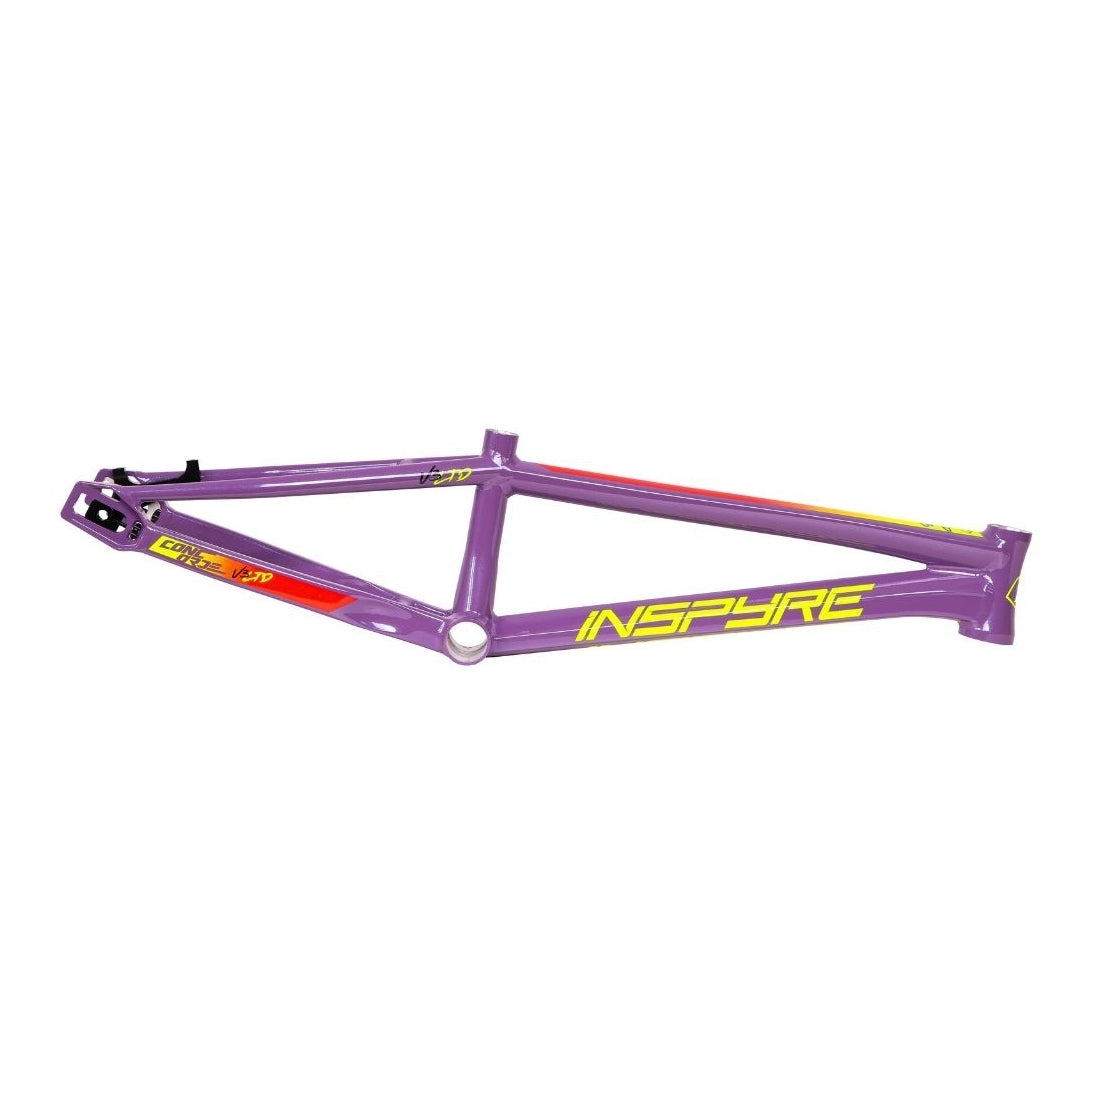 A purple and yellow aluminum BMX Race bike frame with the "Inspyre Concorde V3 Pro XXL Frame" brand name.